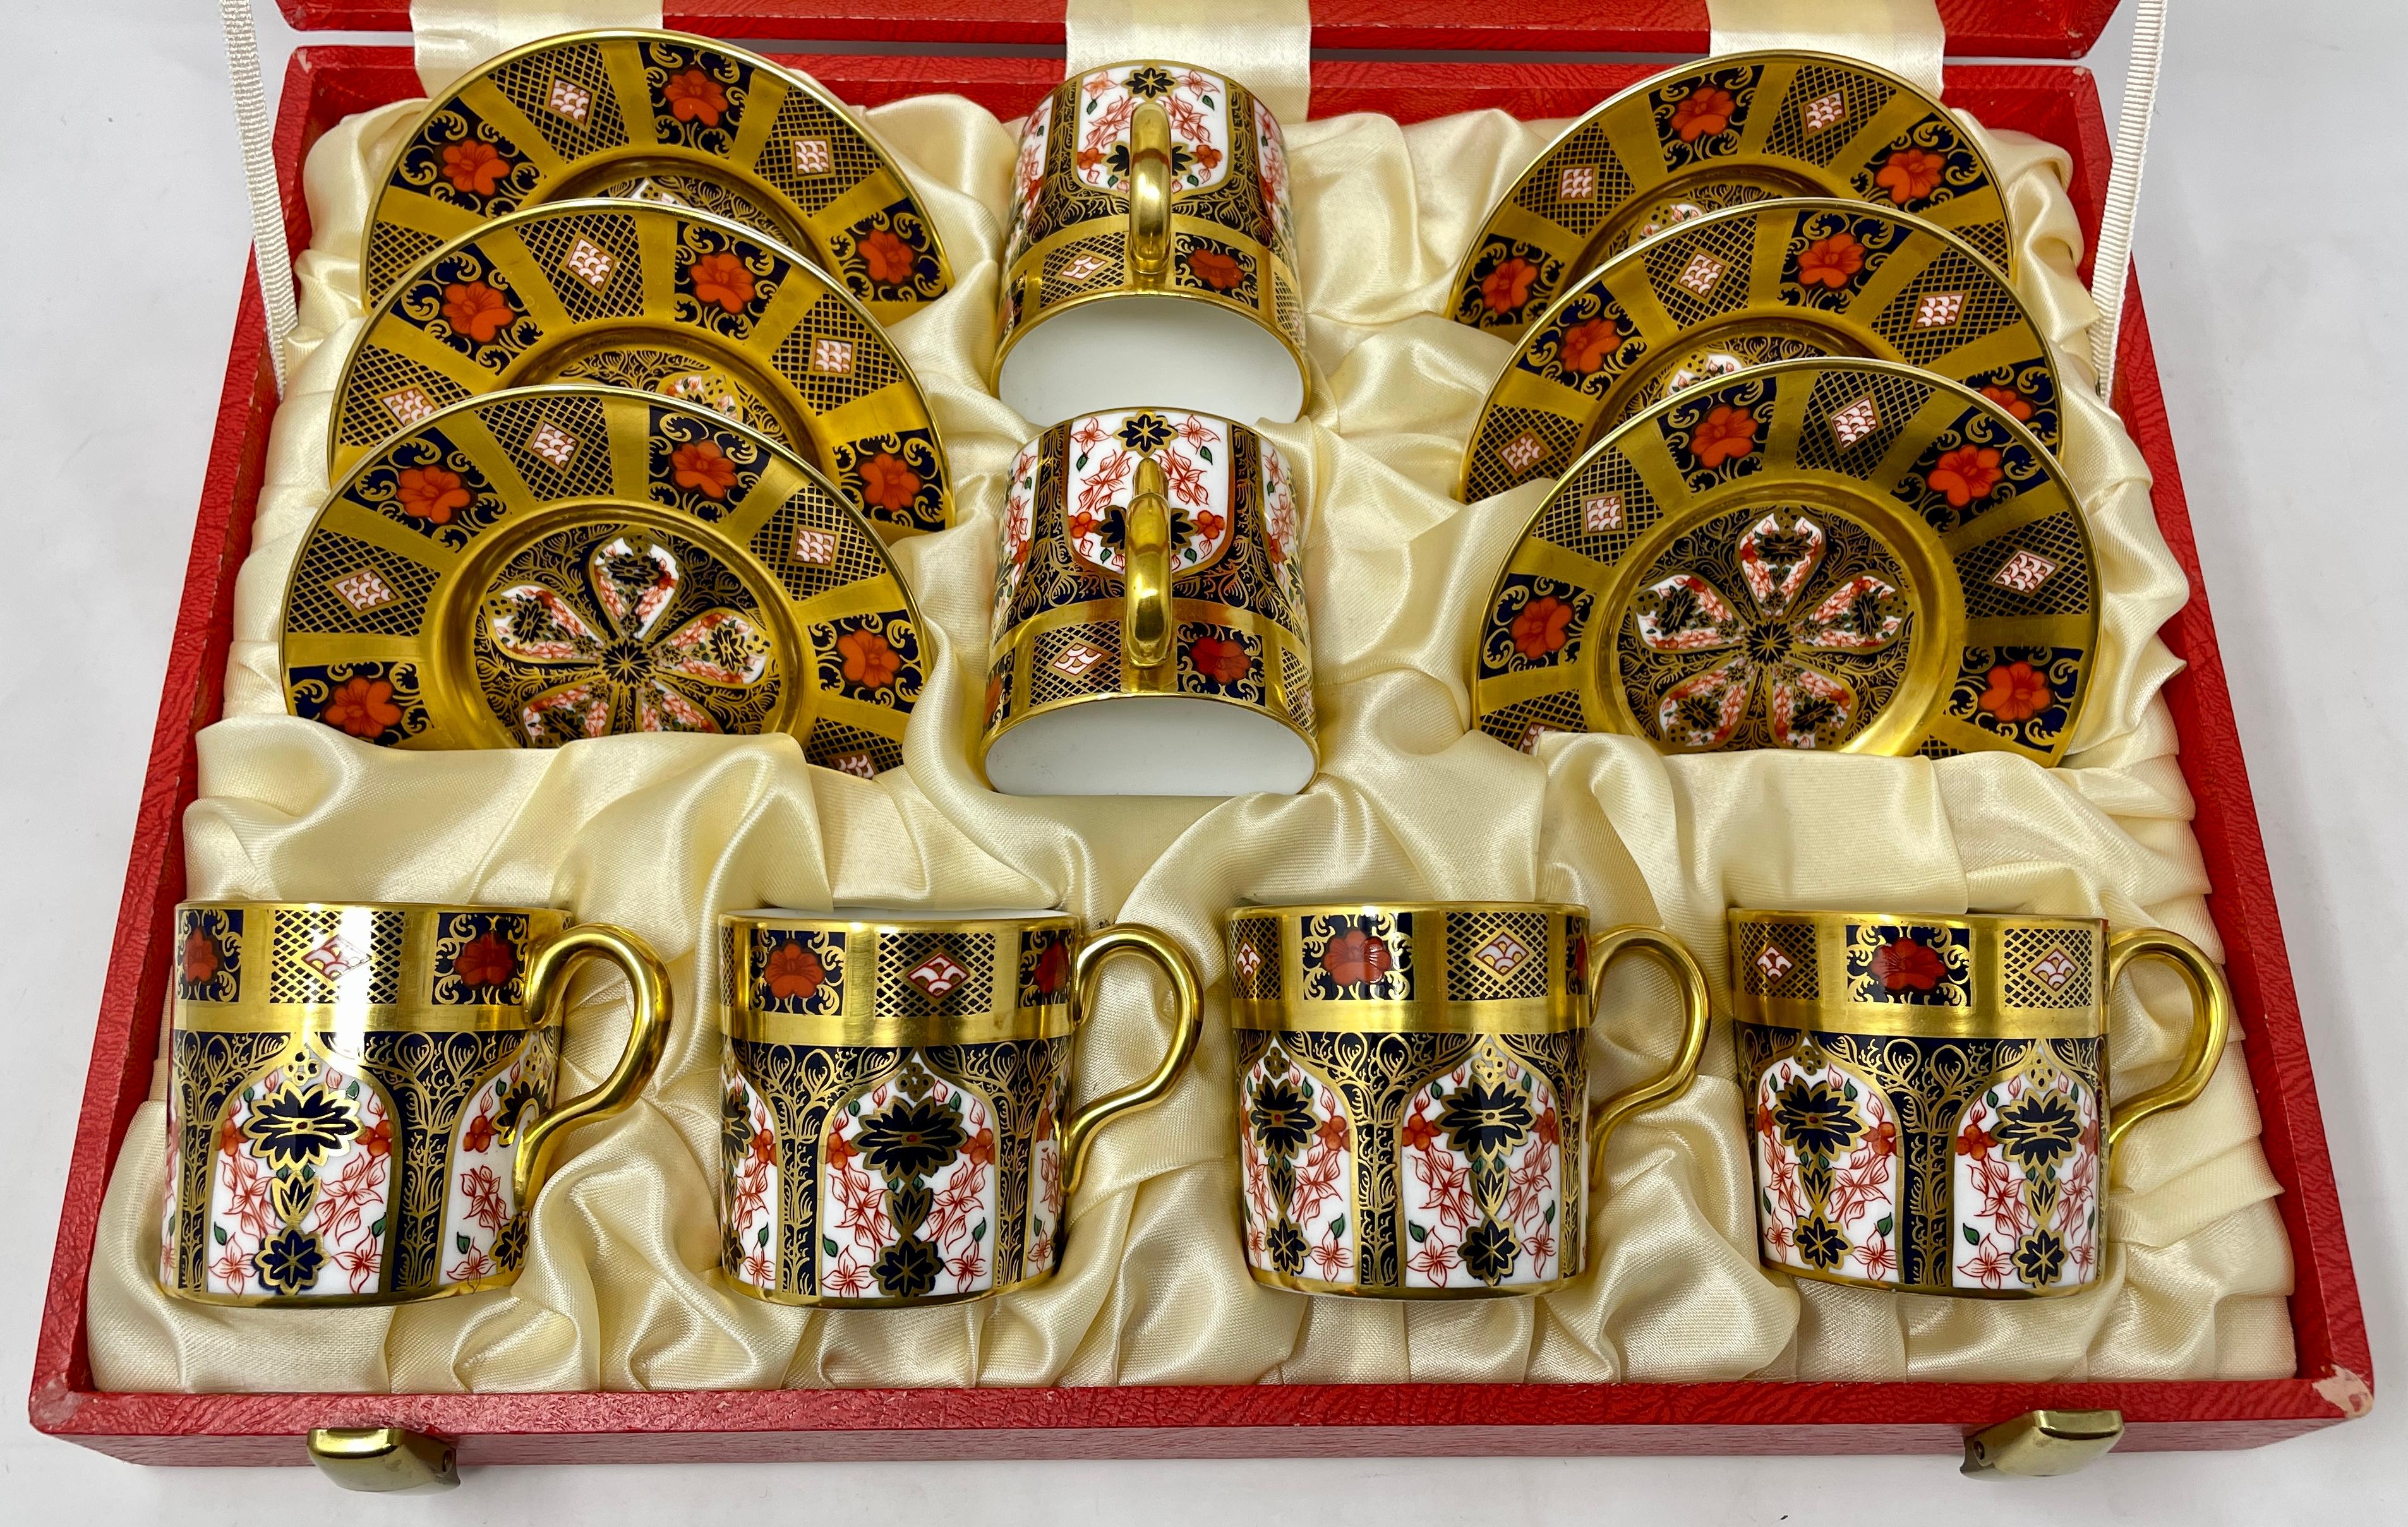 Set of 6 Estate English Royal Crown Derby Porcelain Demitasse Cups and Saucers. 
Cups: height - 2.5 inches, diameter - 2.5 inches
Saucers: height- 1 inch, diameter - 4.5 inches 